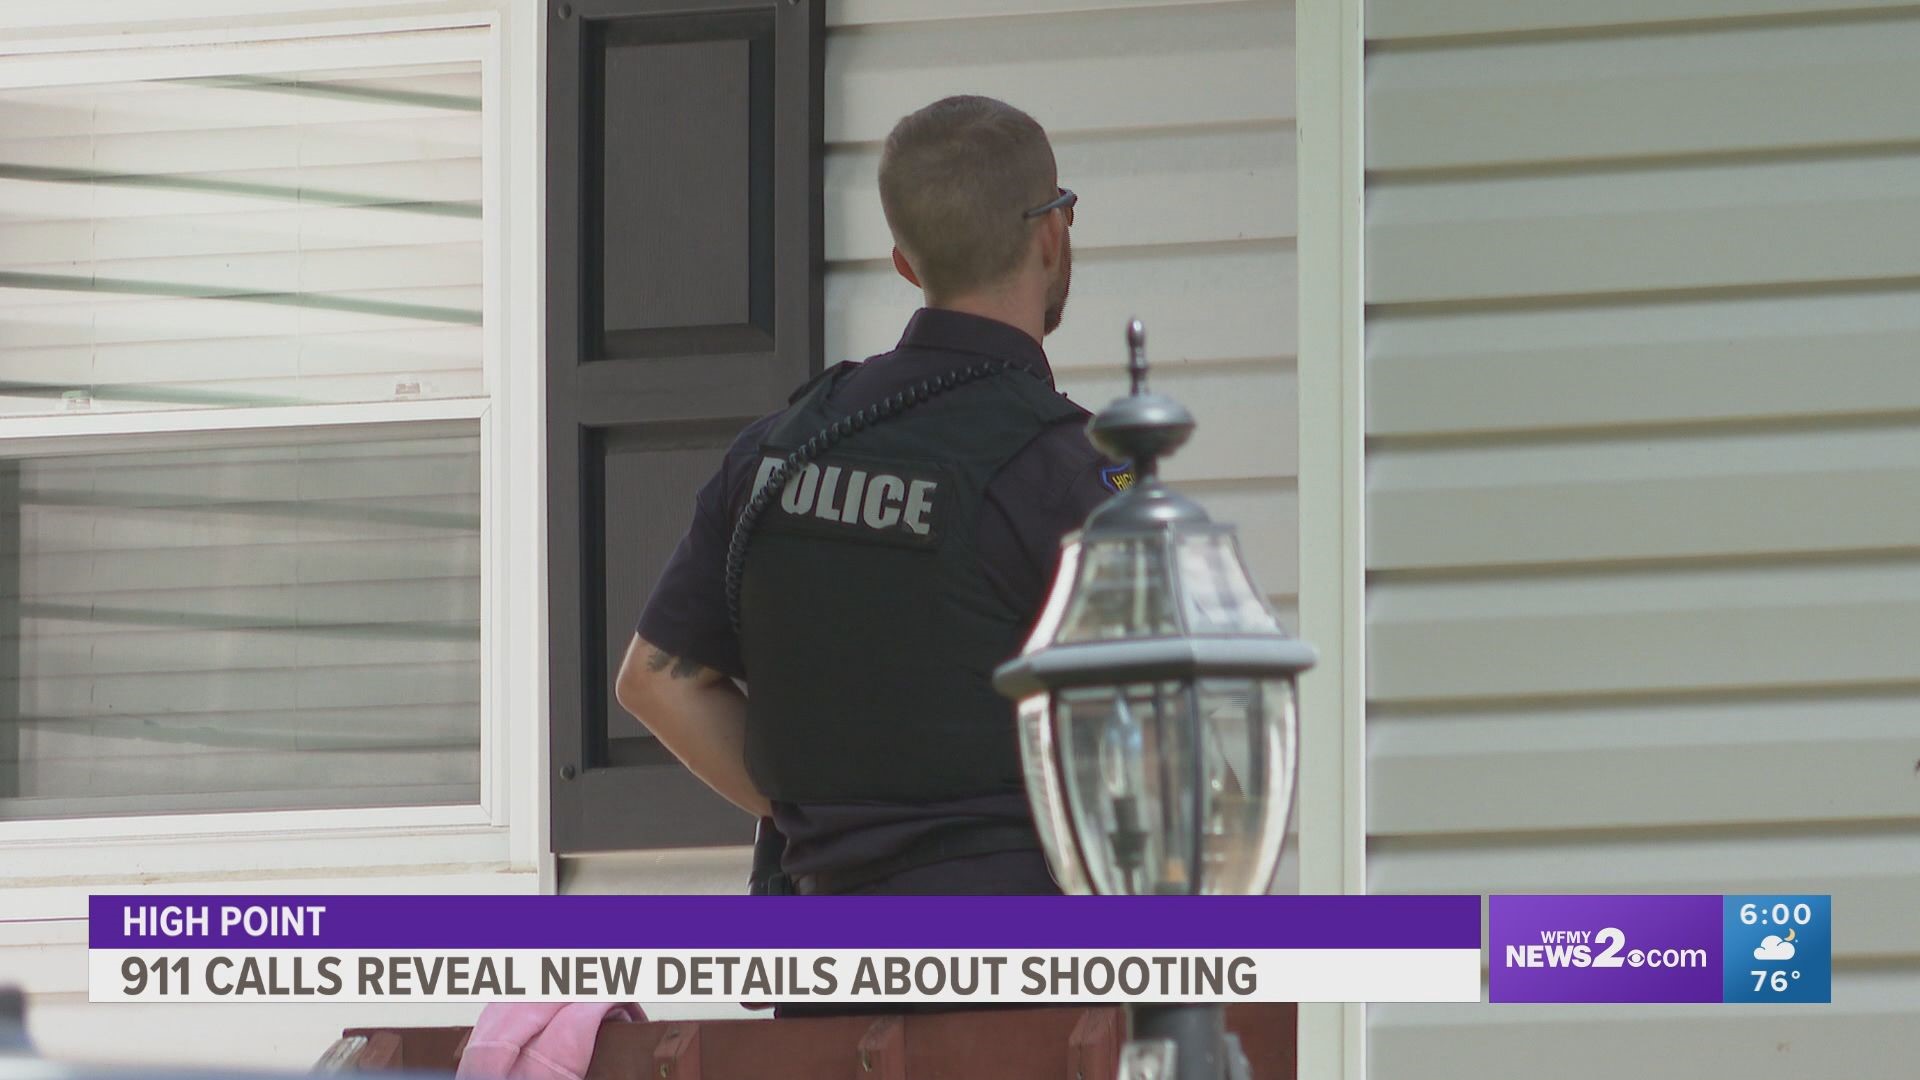 Police said someone shot and killed a man inside the Westdale Drive home early Thursday.